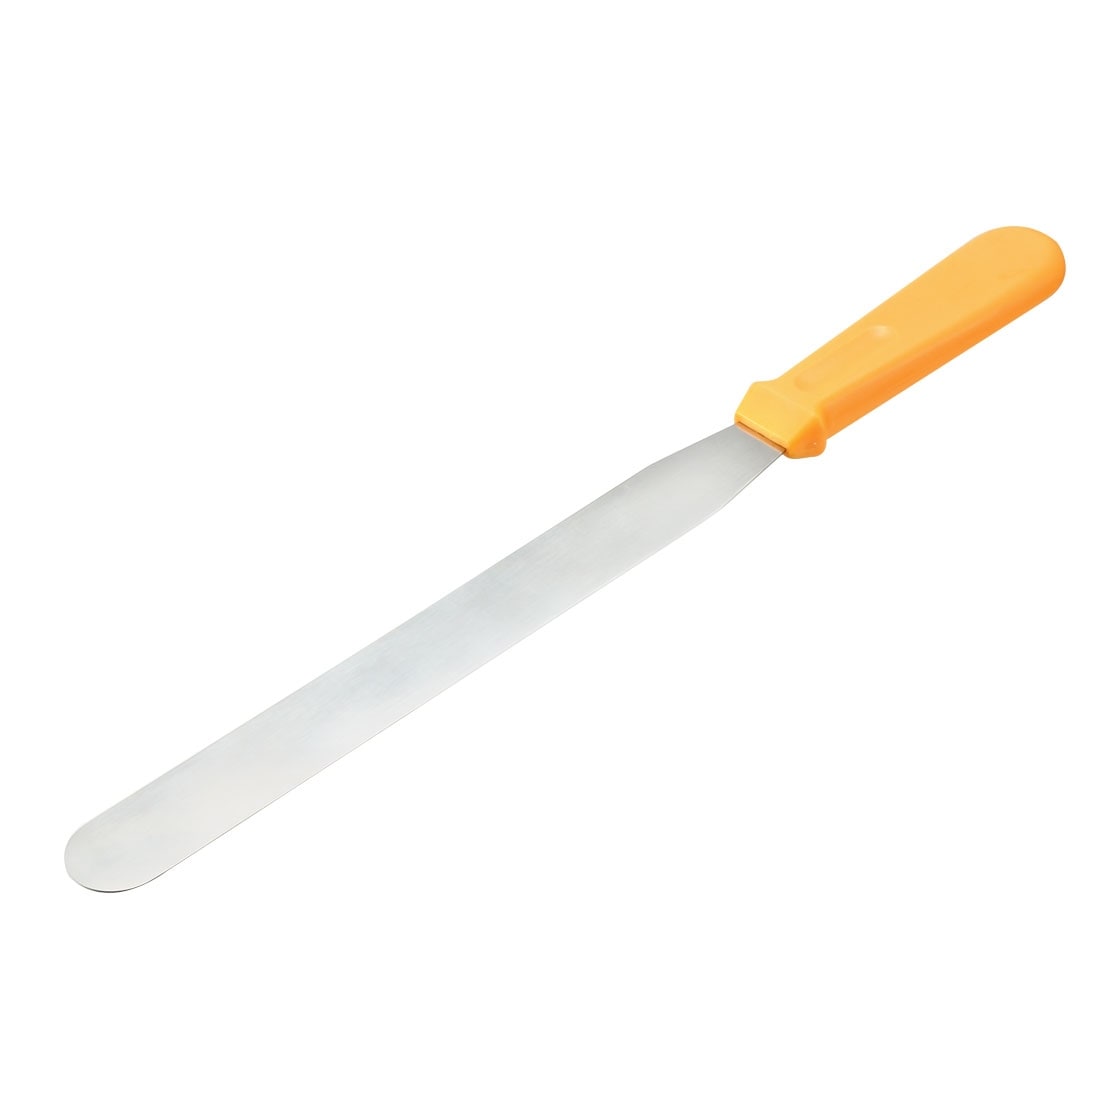 https://ak1.ostkcdn.com/images/products/is/images/direct/c636b22301c2f8464199bfea8e2da942f45358c4/Straight-Icing-Spatula-Stainless-Steel-8-inch-Cake-Decorating-Frosting-Spatulas.jpg